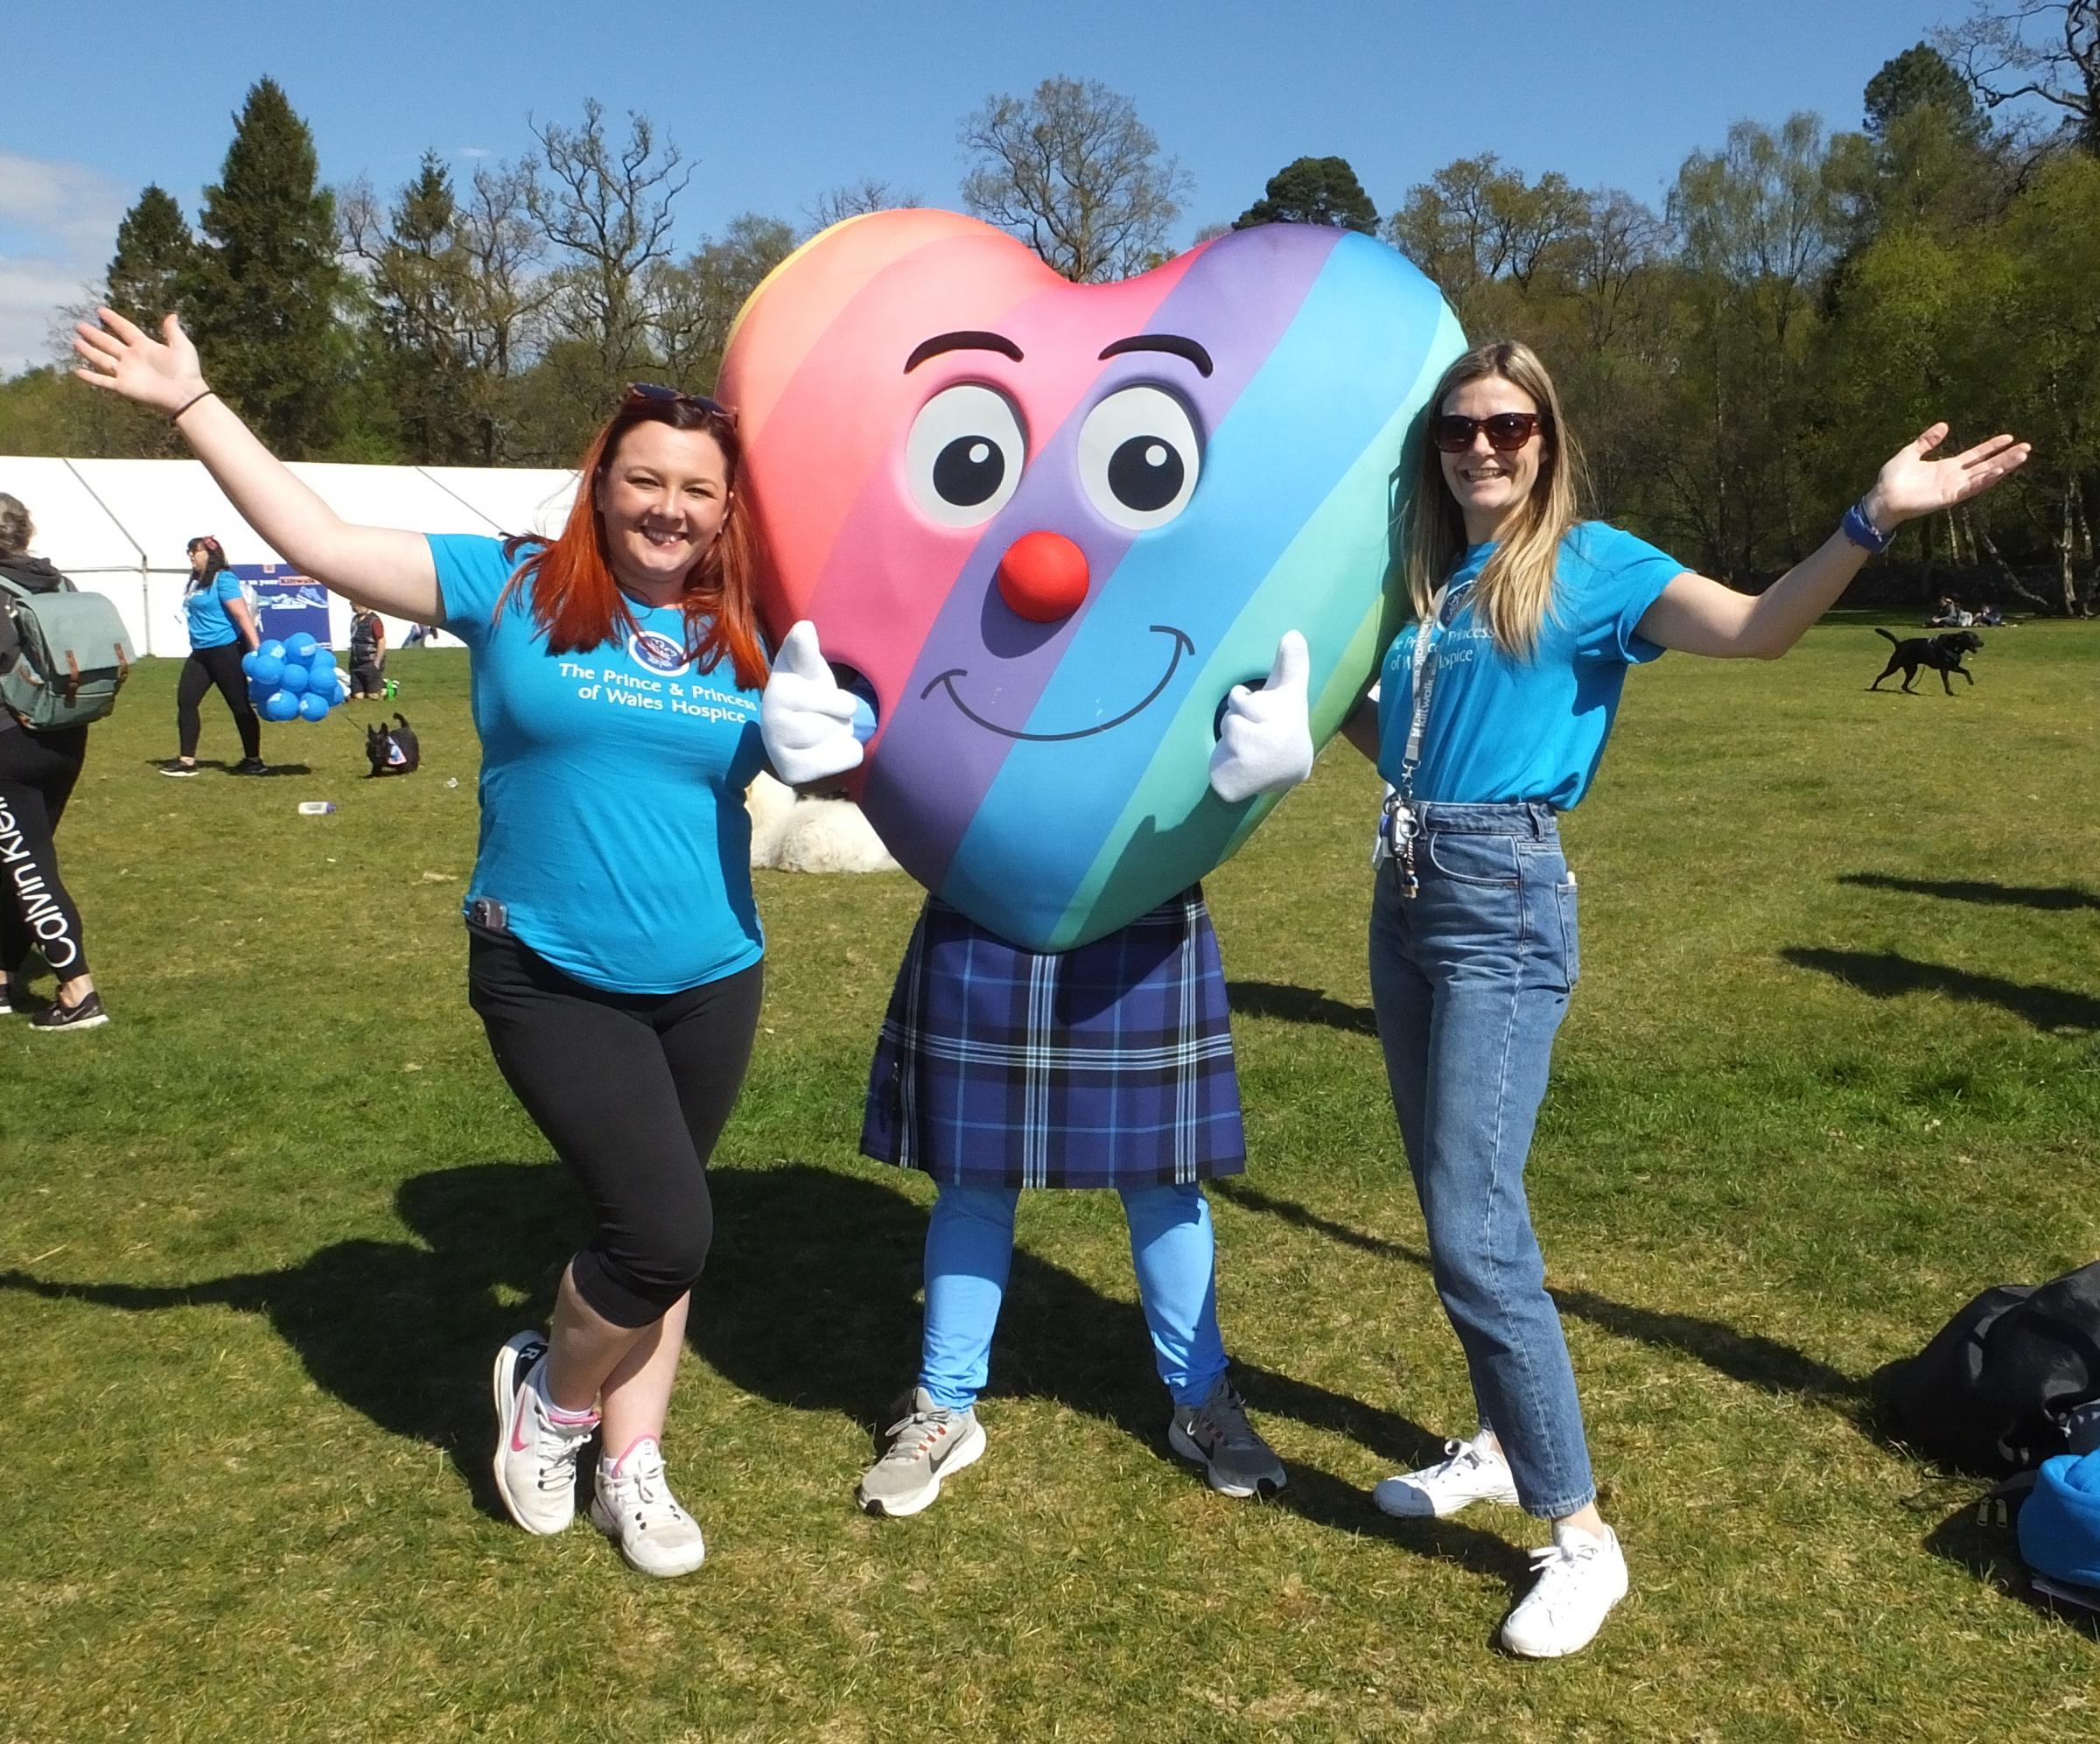 More than 10,000 people headed to Loch Lomond on Sunday for the finish of the Kiltwalk